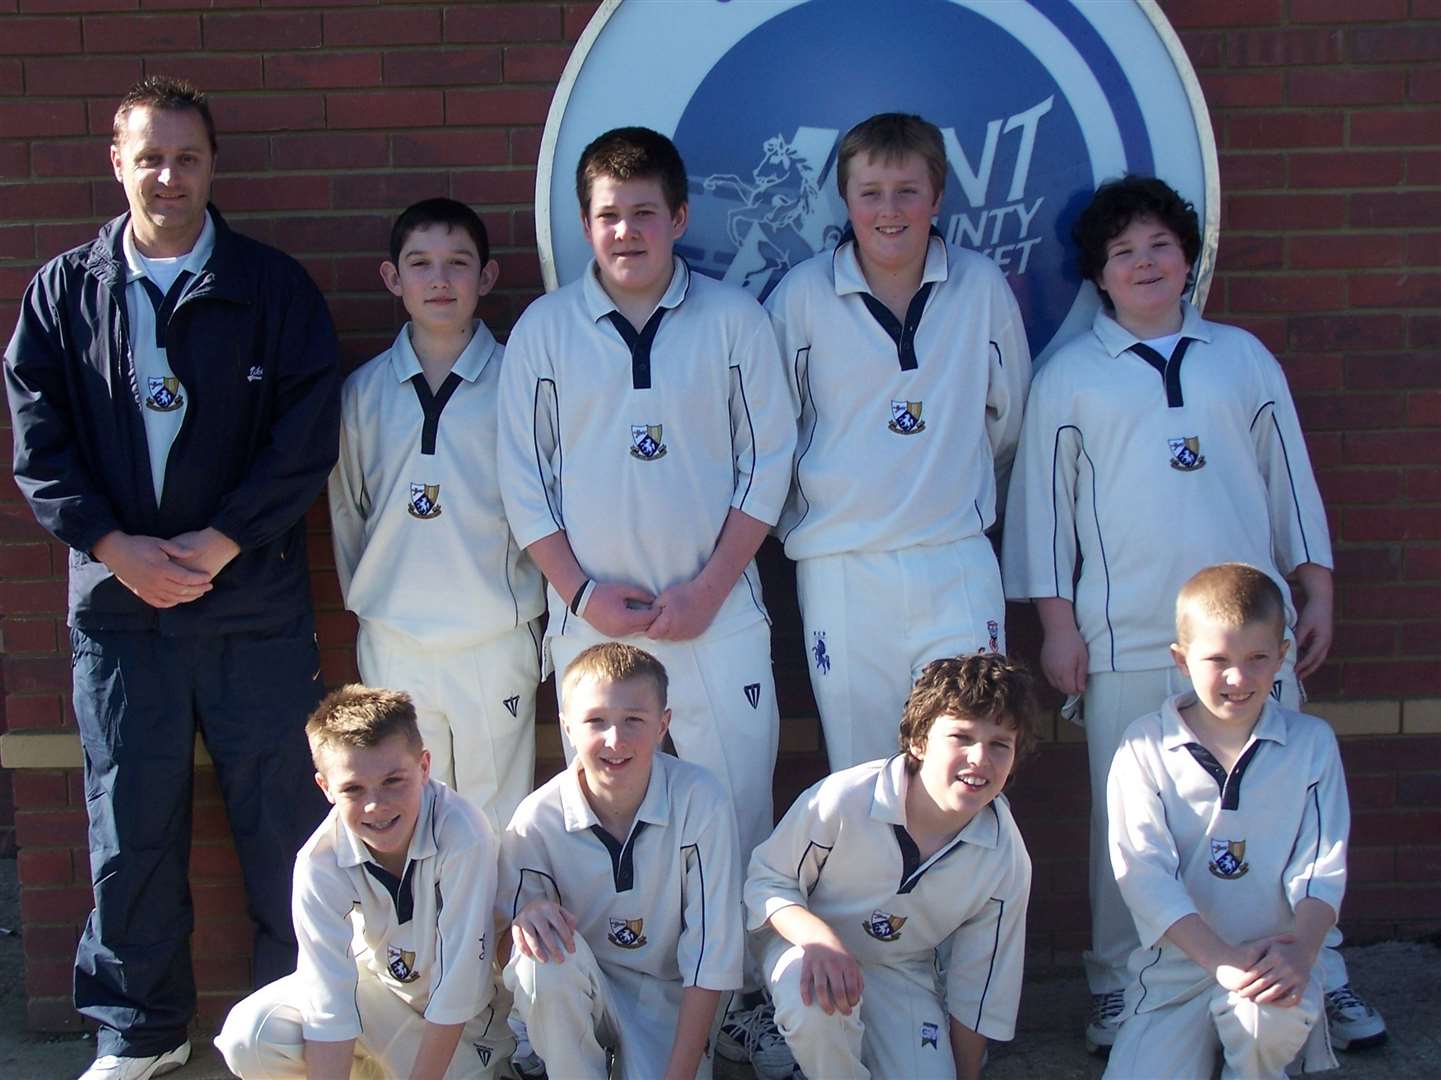 A young Ollie Robinson (back row, second from right) pictured with his Margate under-13 team-mates after winning the Canterbury Indoor League in 2006. Dad Ian, who coached the side, is also in the picture